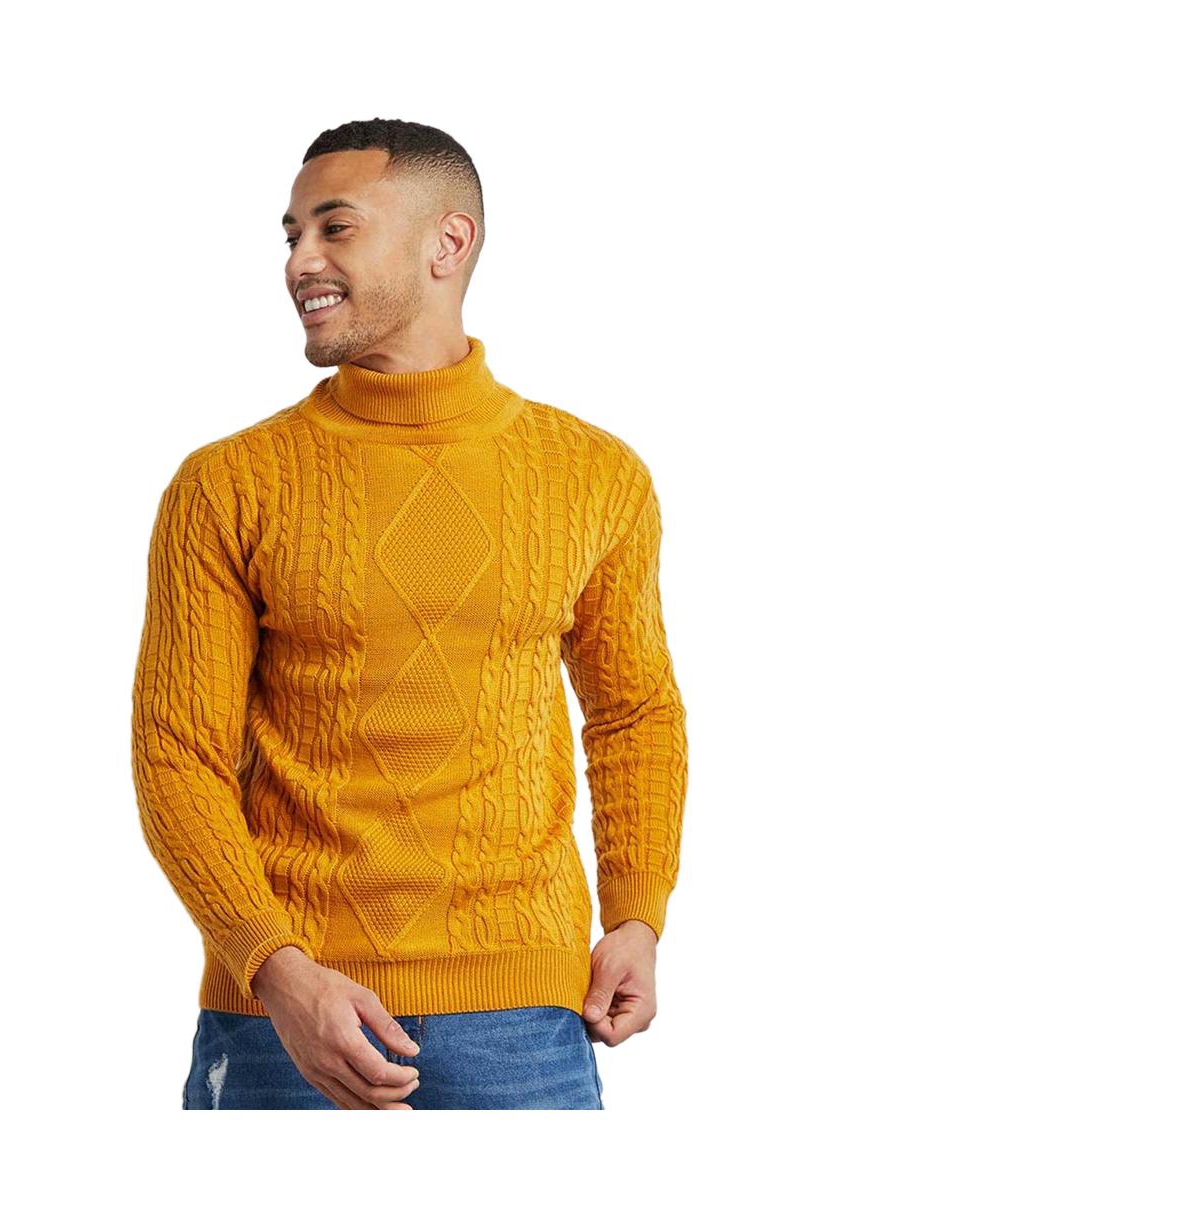 Campus Sutra Men's Mustard Yellow Relaxed Cable-knit Pullover Sweater